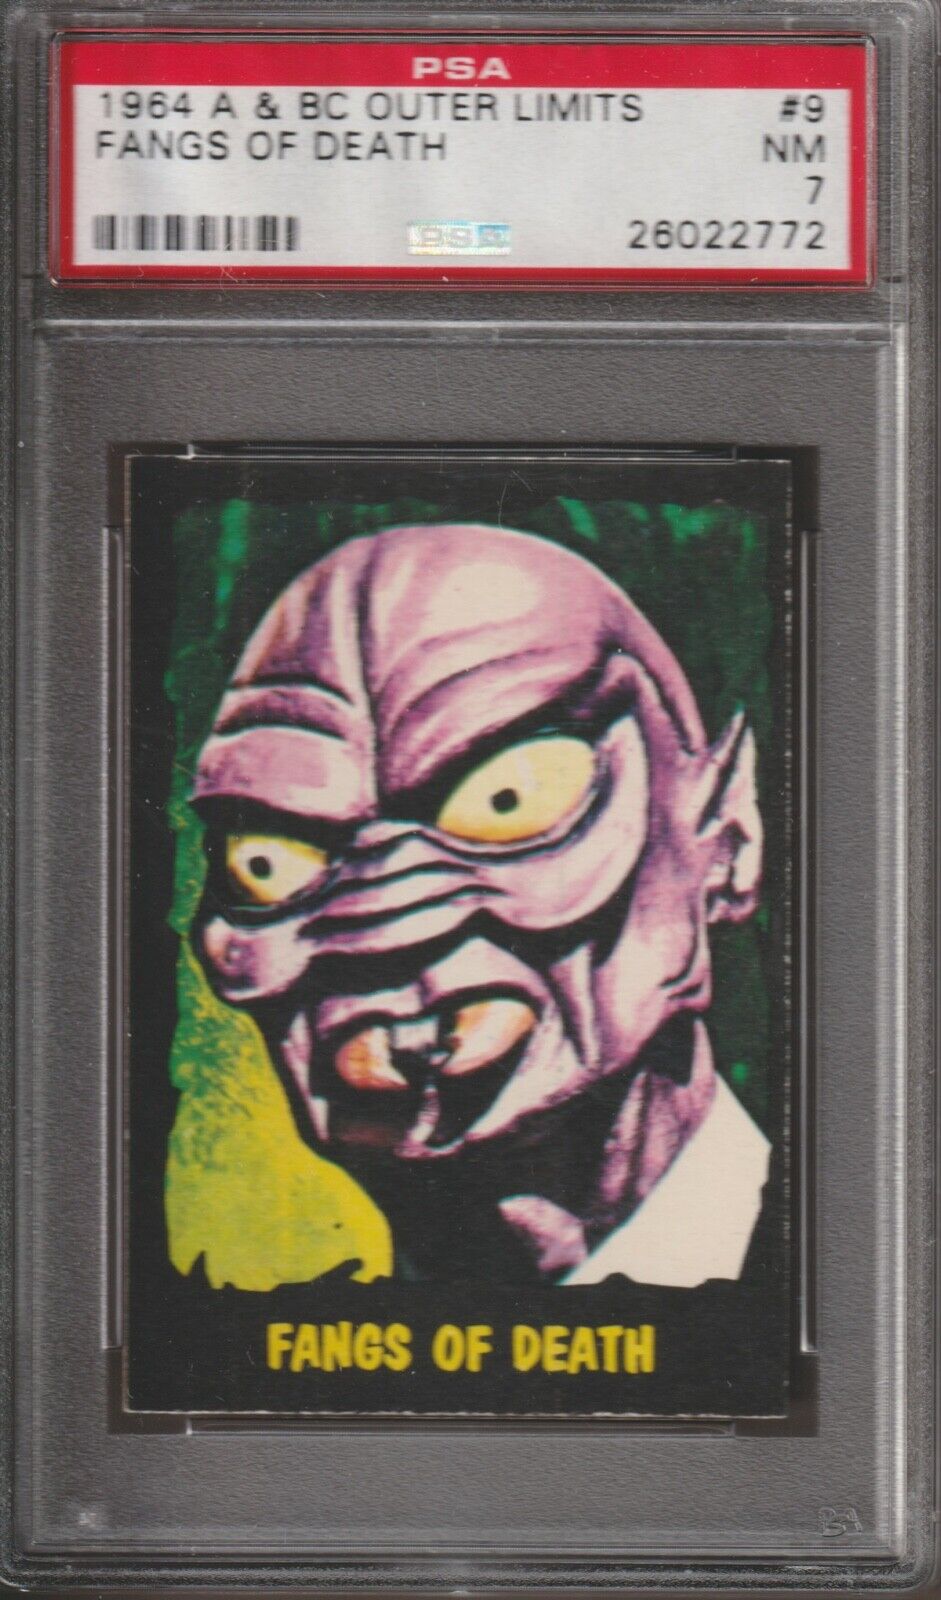 1964 OUTER LIMITS TRADING CARD #9 - A & BC ENGLAND - PSA 7 - FANGS OF DEATH